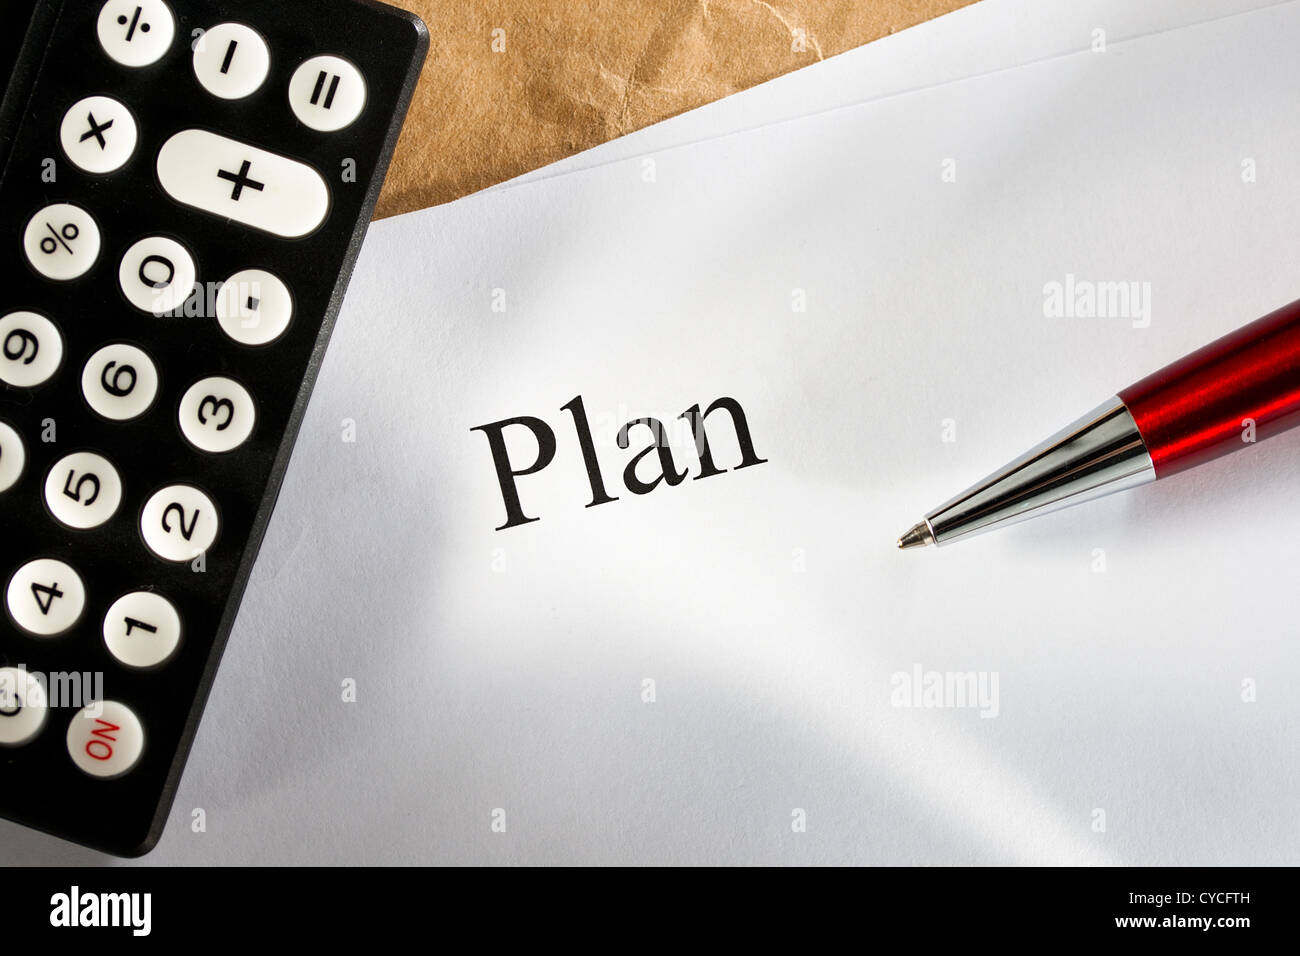 Plan conception with calculator Stock Photo